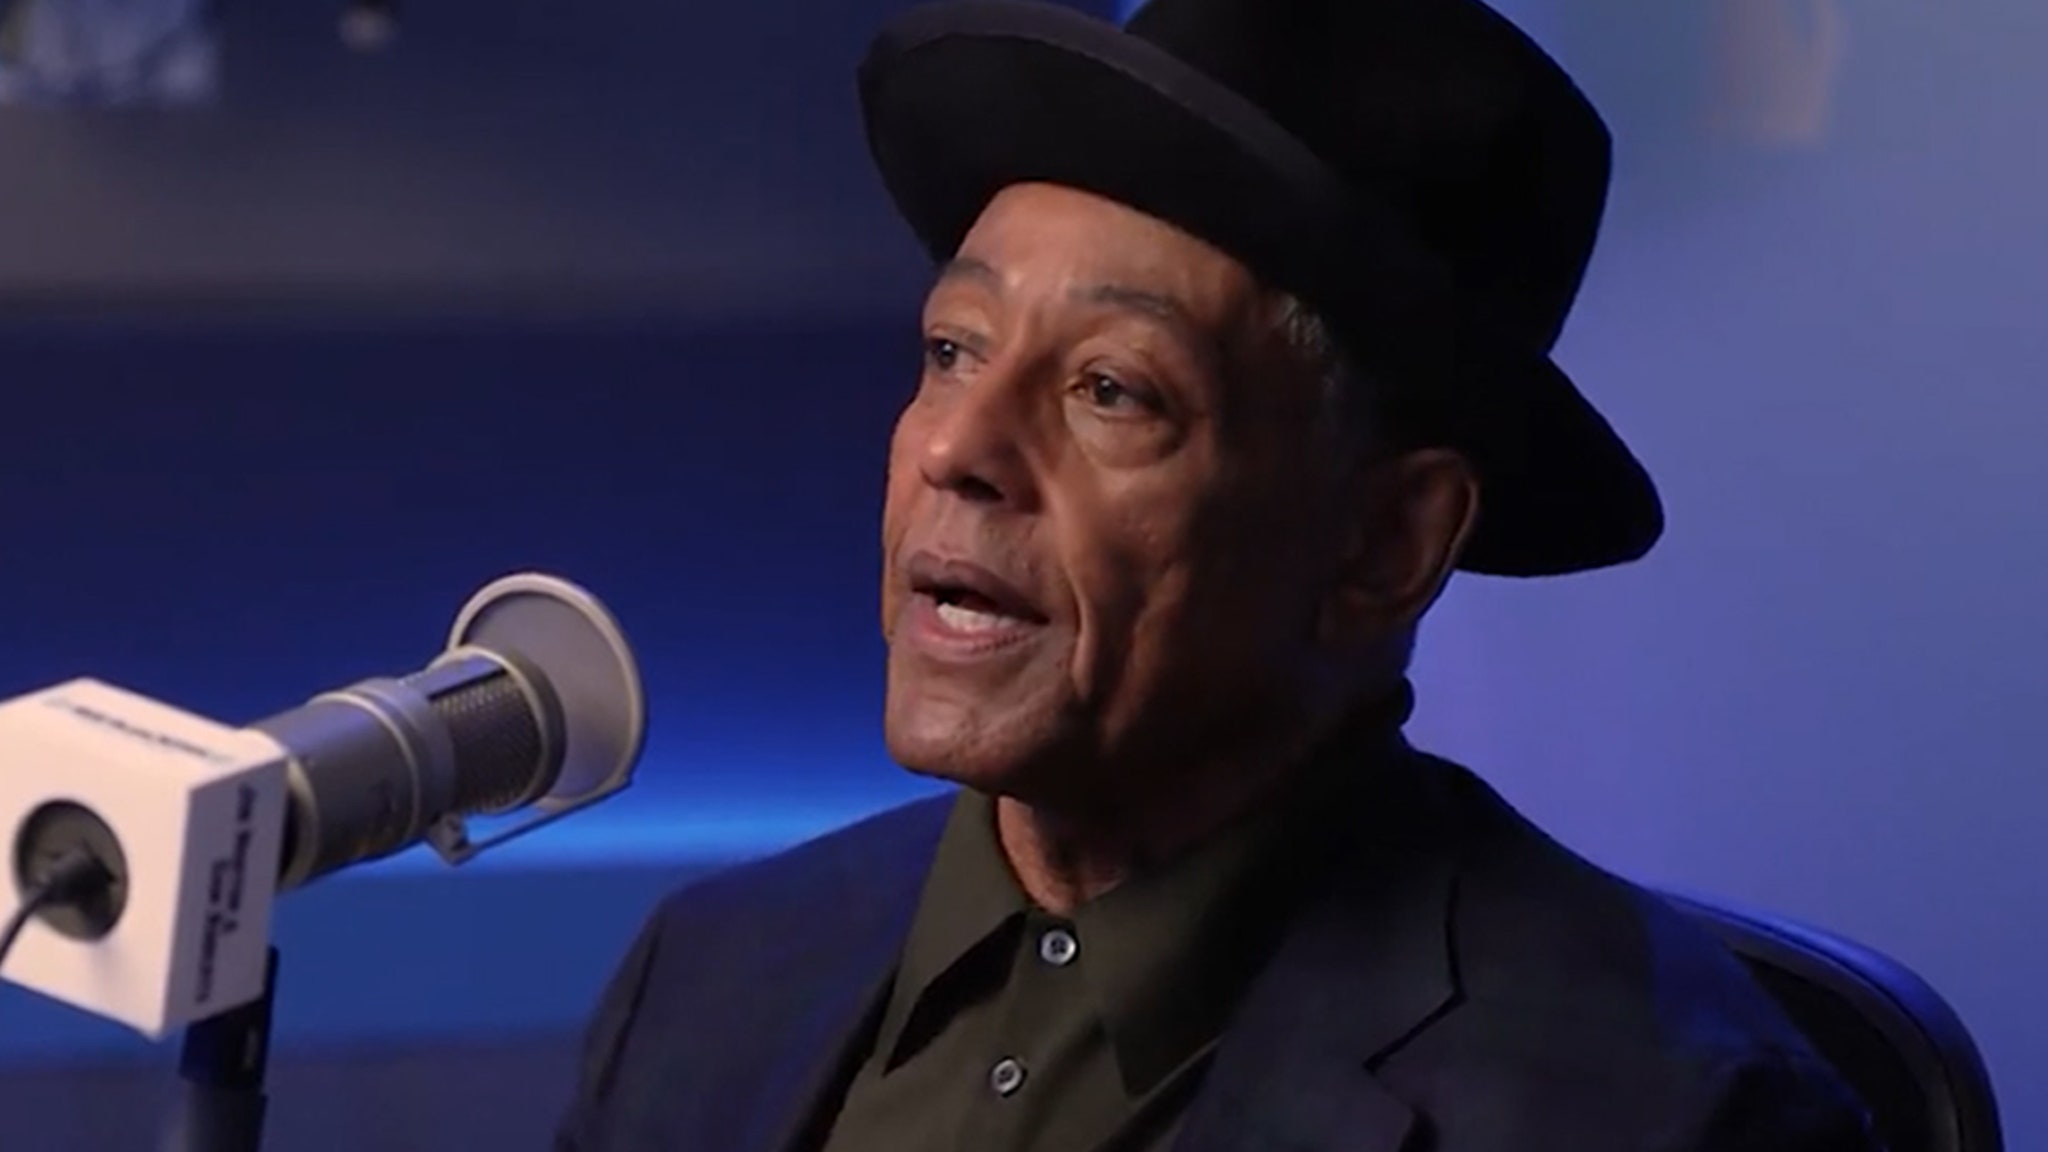 Giancarlo Esposito Considered a Murder-for-Hire Plot During Money Struggles